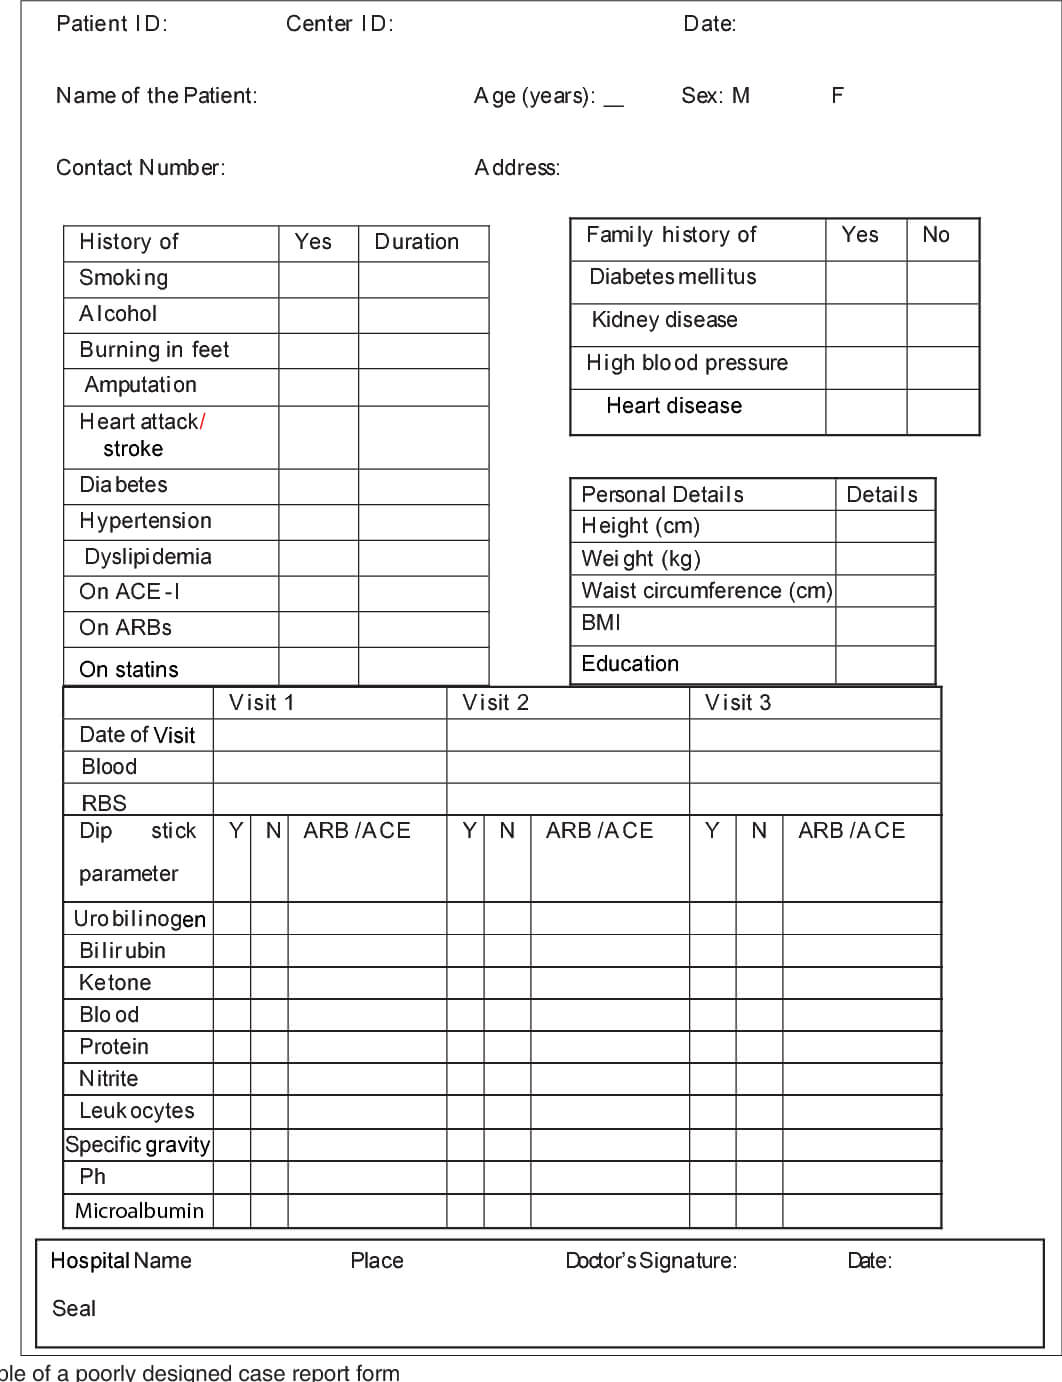 Basics Of Case Report Form Designing In Clinical Research With Case Report Form Template